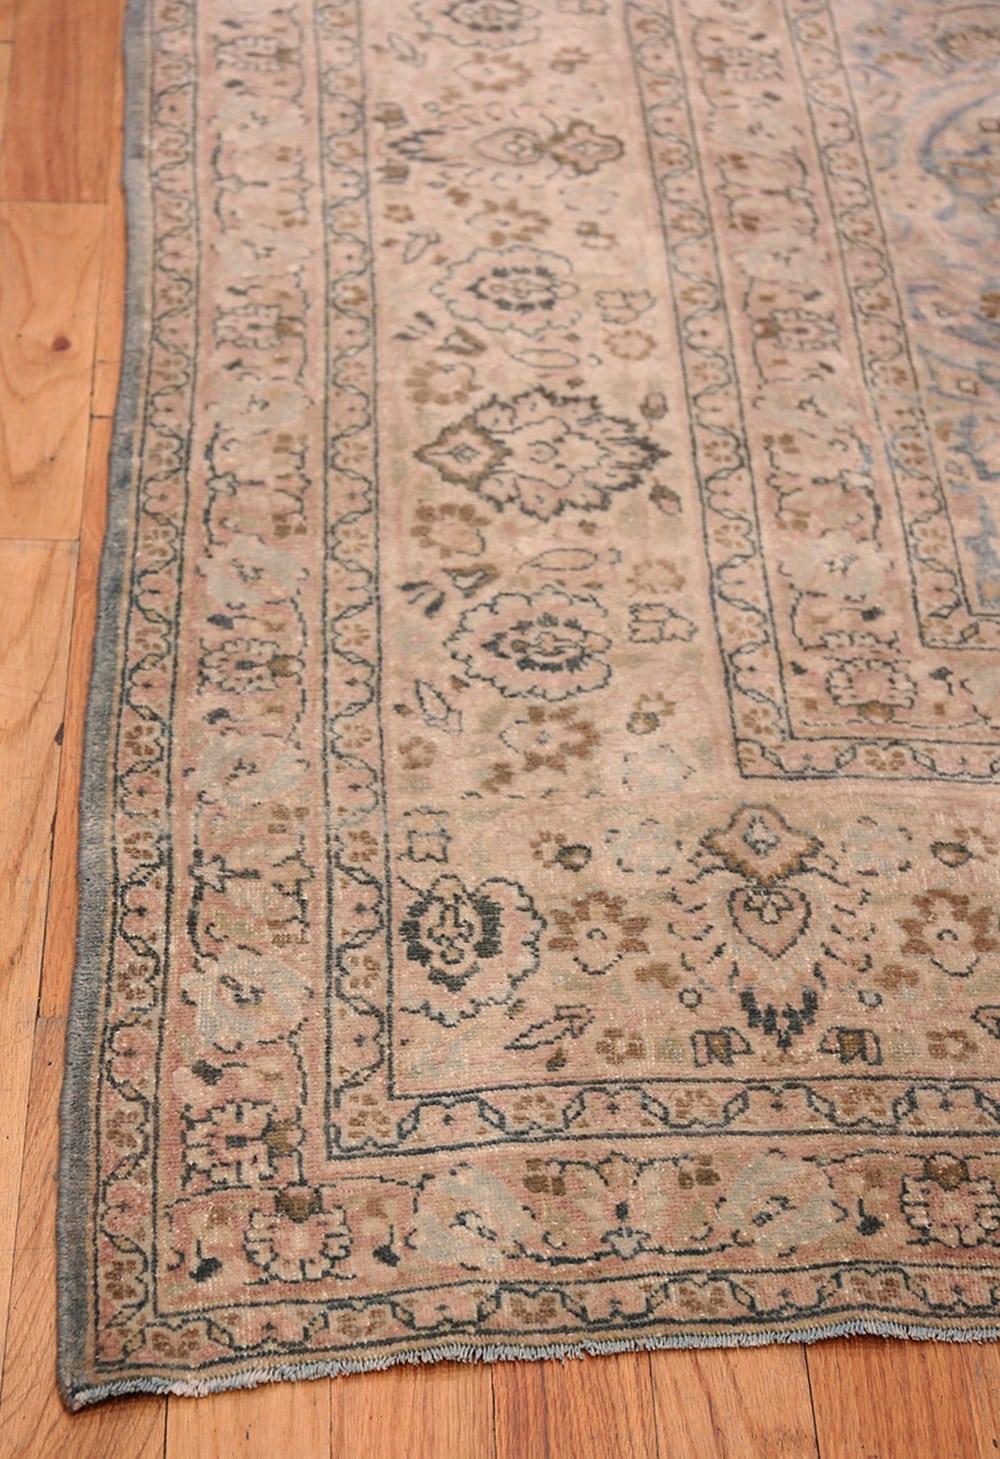 20th Century Light Blue Antique Persian Khorassan Rug. Size: 10 ft 2 in x 13 ft